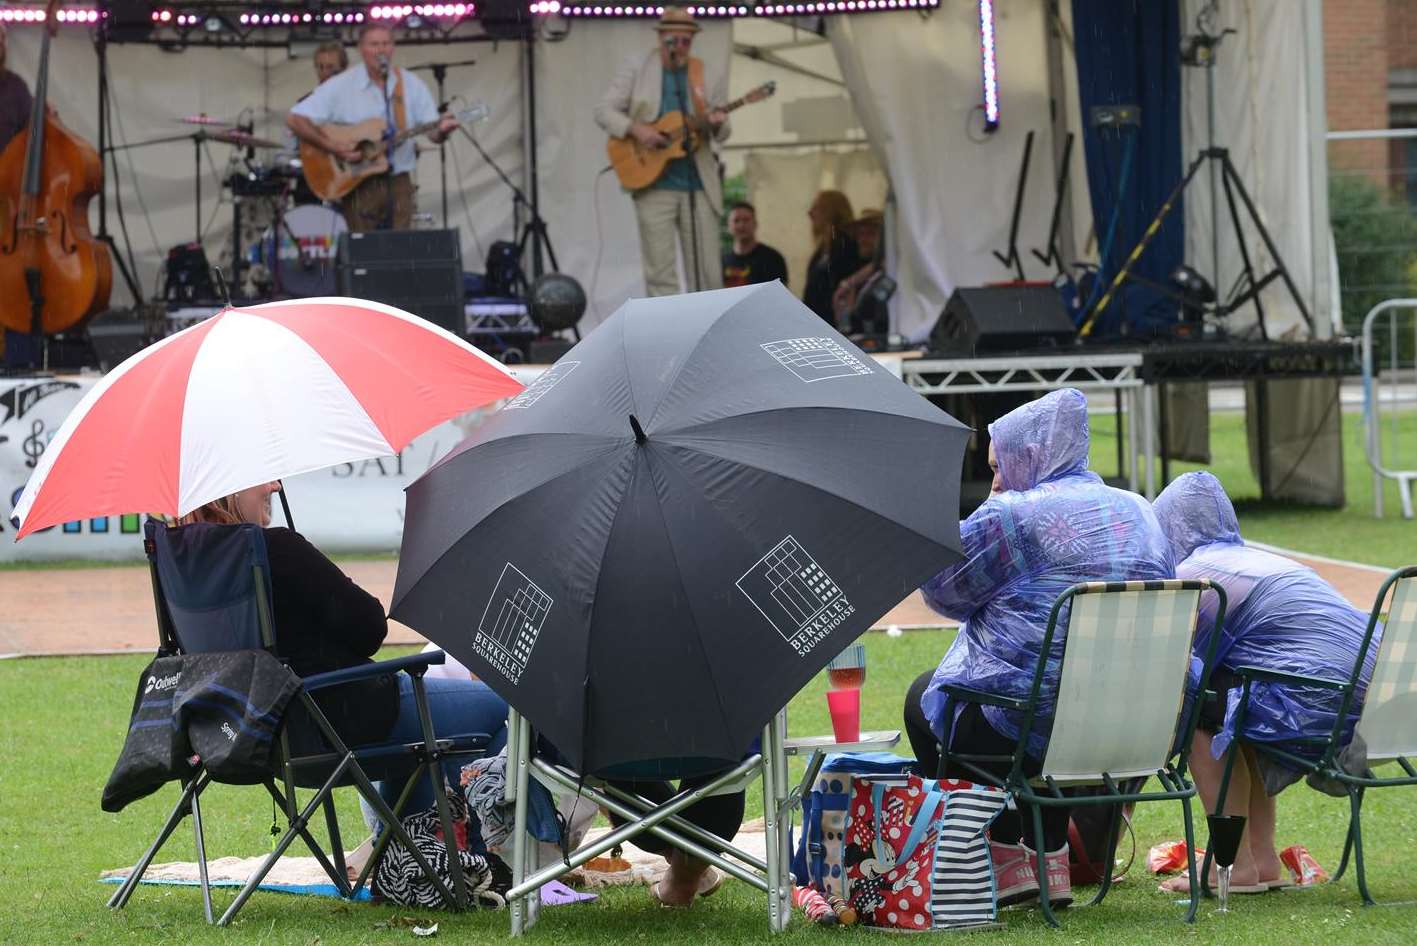 The damp weather didn't stop these music fans